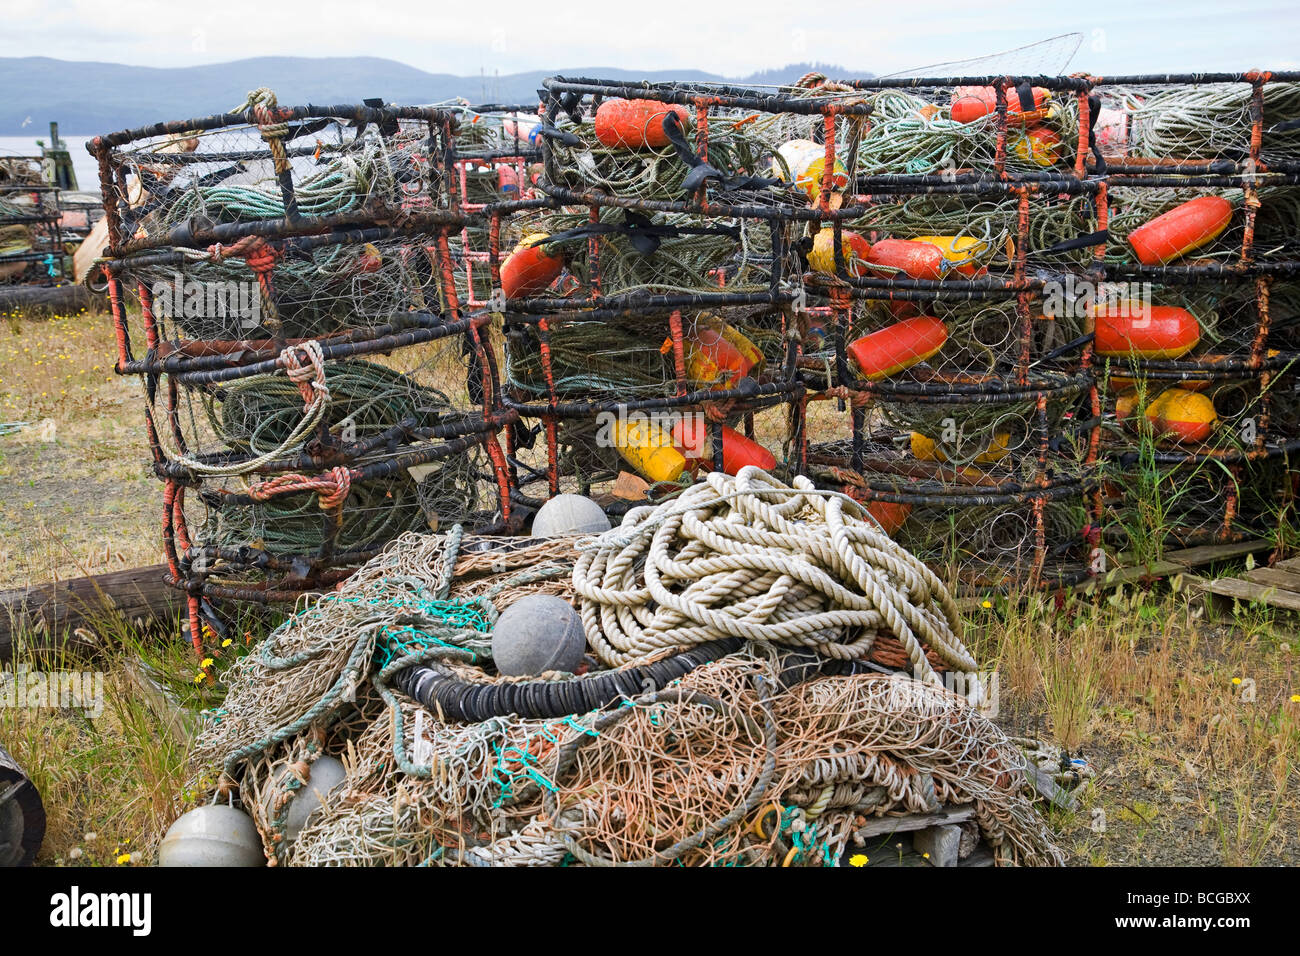 Crab pots or traps fishing nets and buoys decorate a wharf in